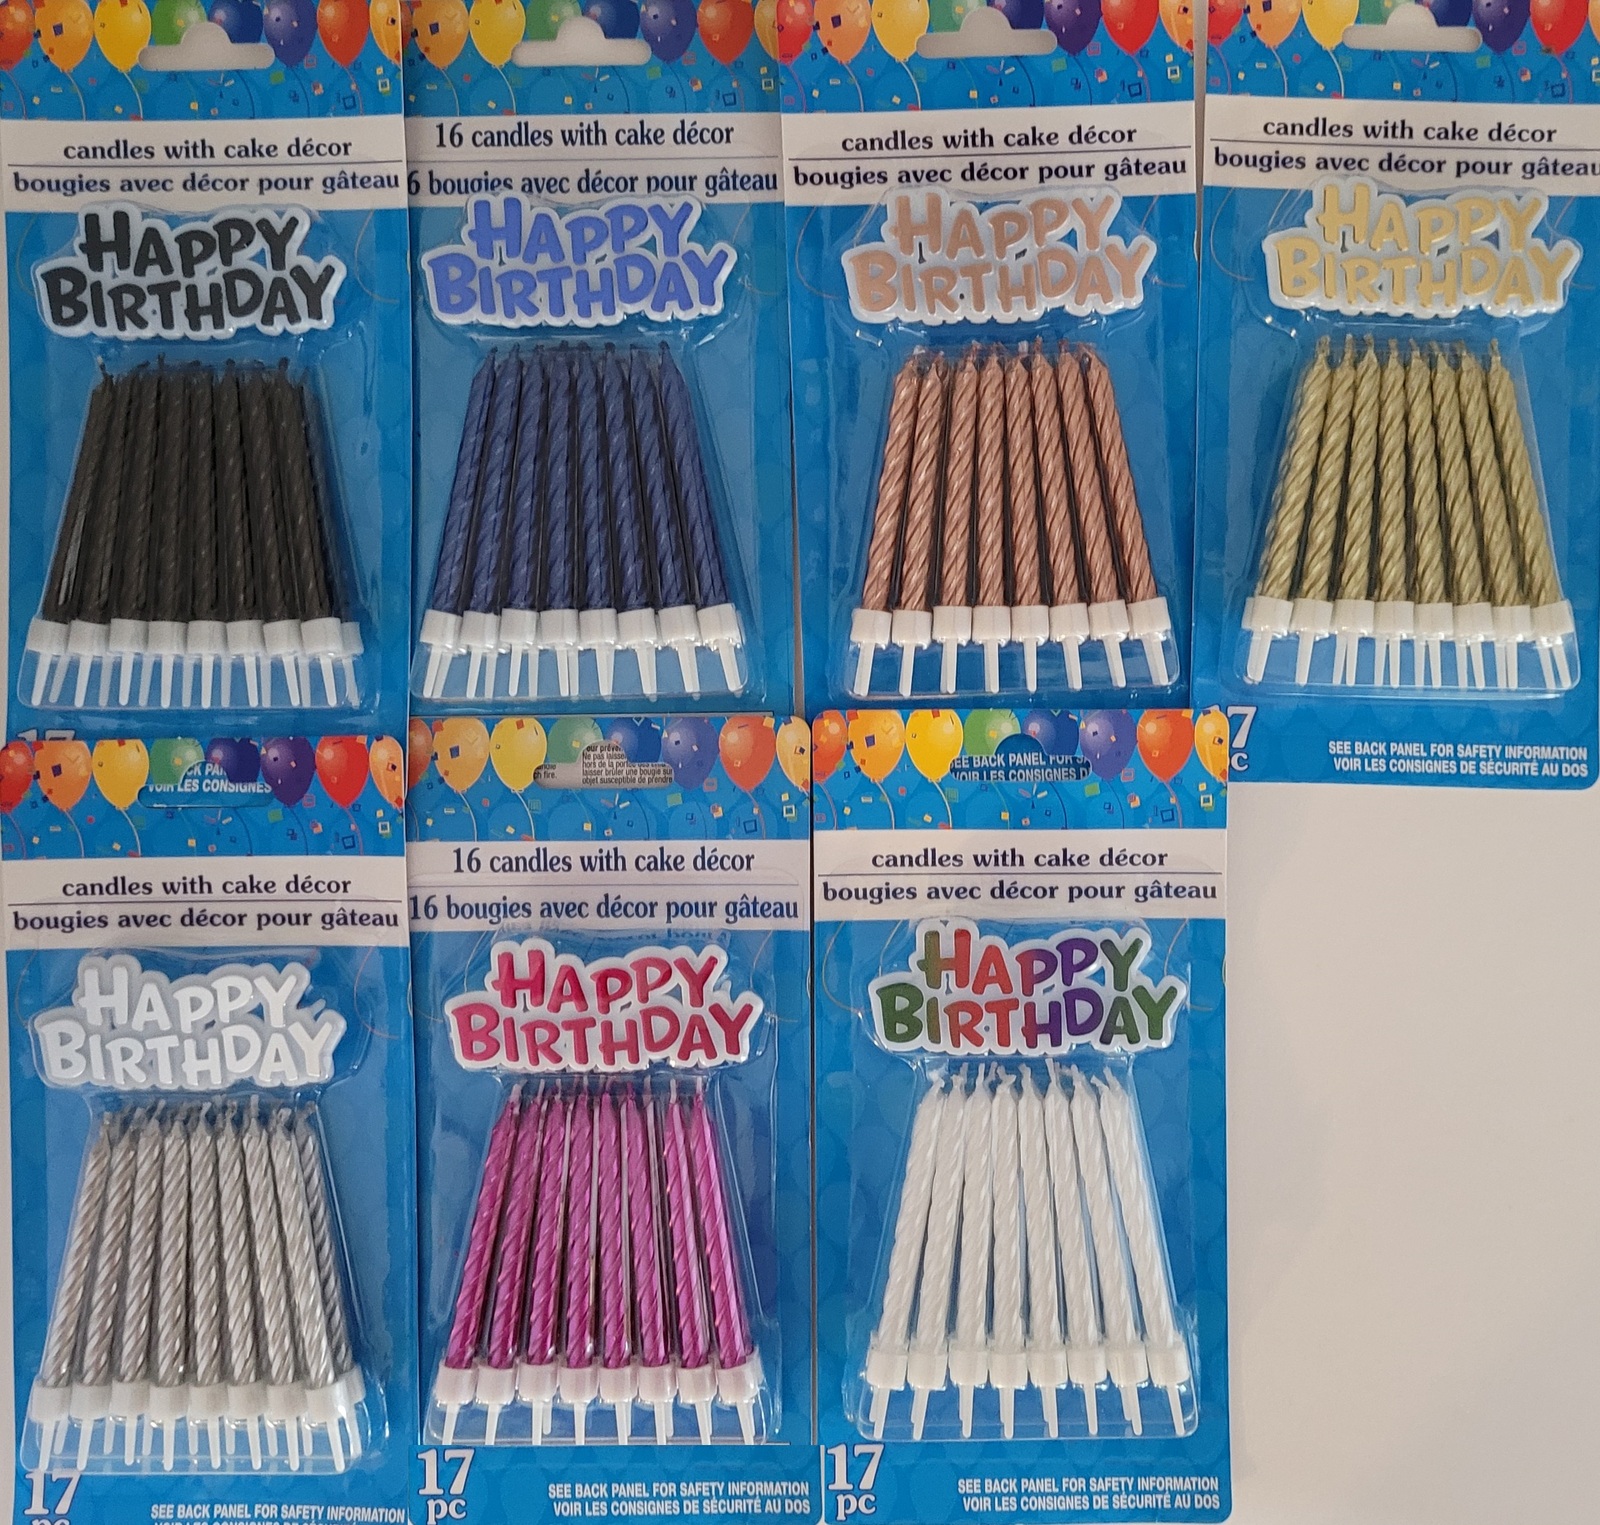 Birthday Spiral Candles 3" Black, Blue, Pink, White, Silver, Copper or Gold 16Ct - $2.96 - $3.46